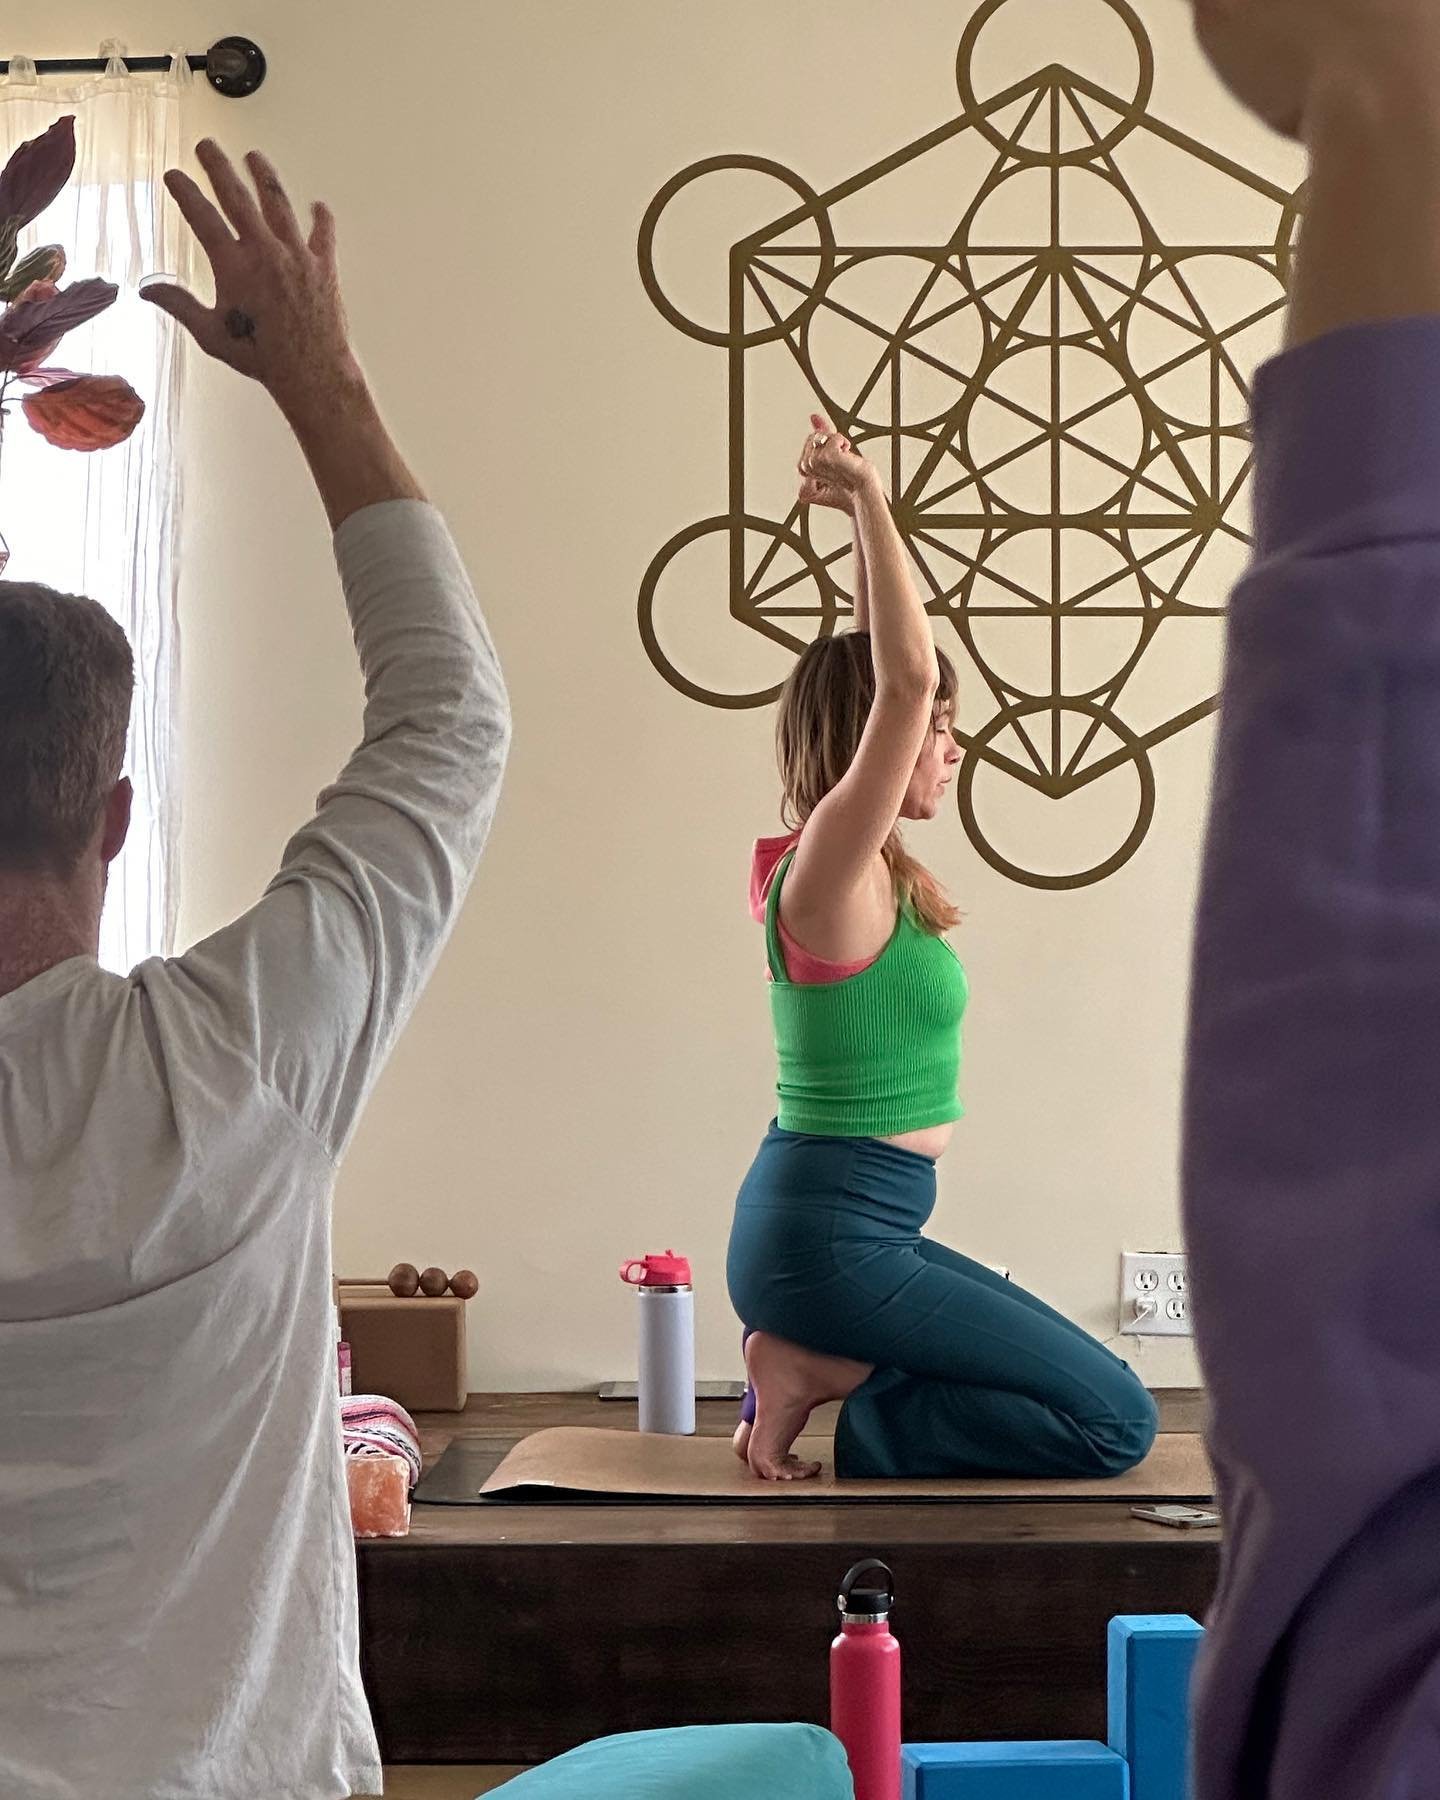 The most common thing I hear from people who come to my class for the first time is &ldquo;wow I had no idea how much I needed that!&rdquo; Come reset with me Tuesday 12-1:15 @yoganestvenice you will be surprised by how easy it is to get there and ho